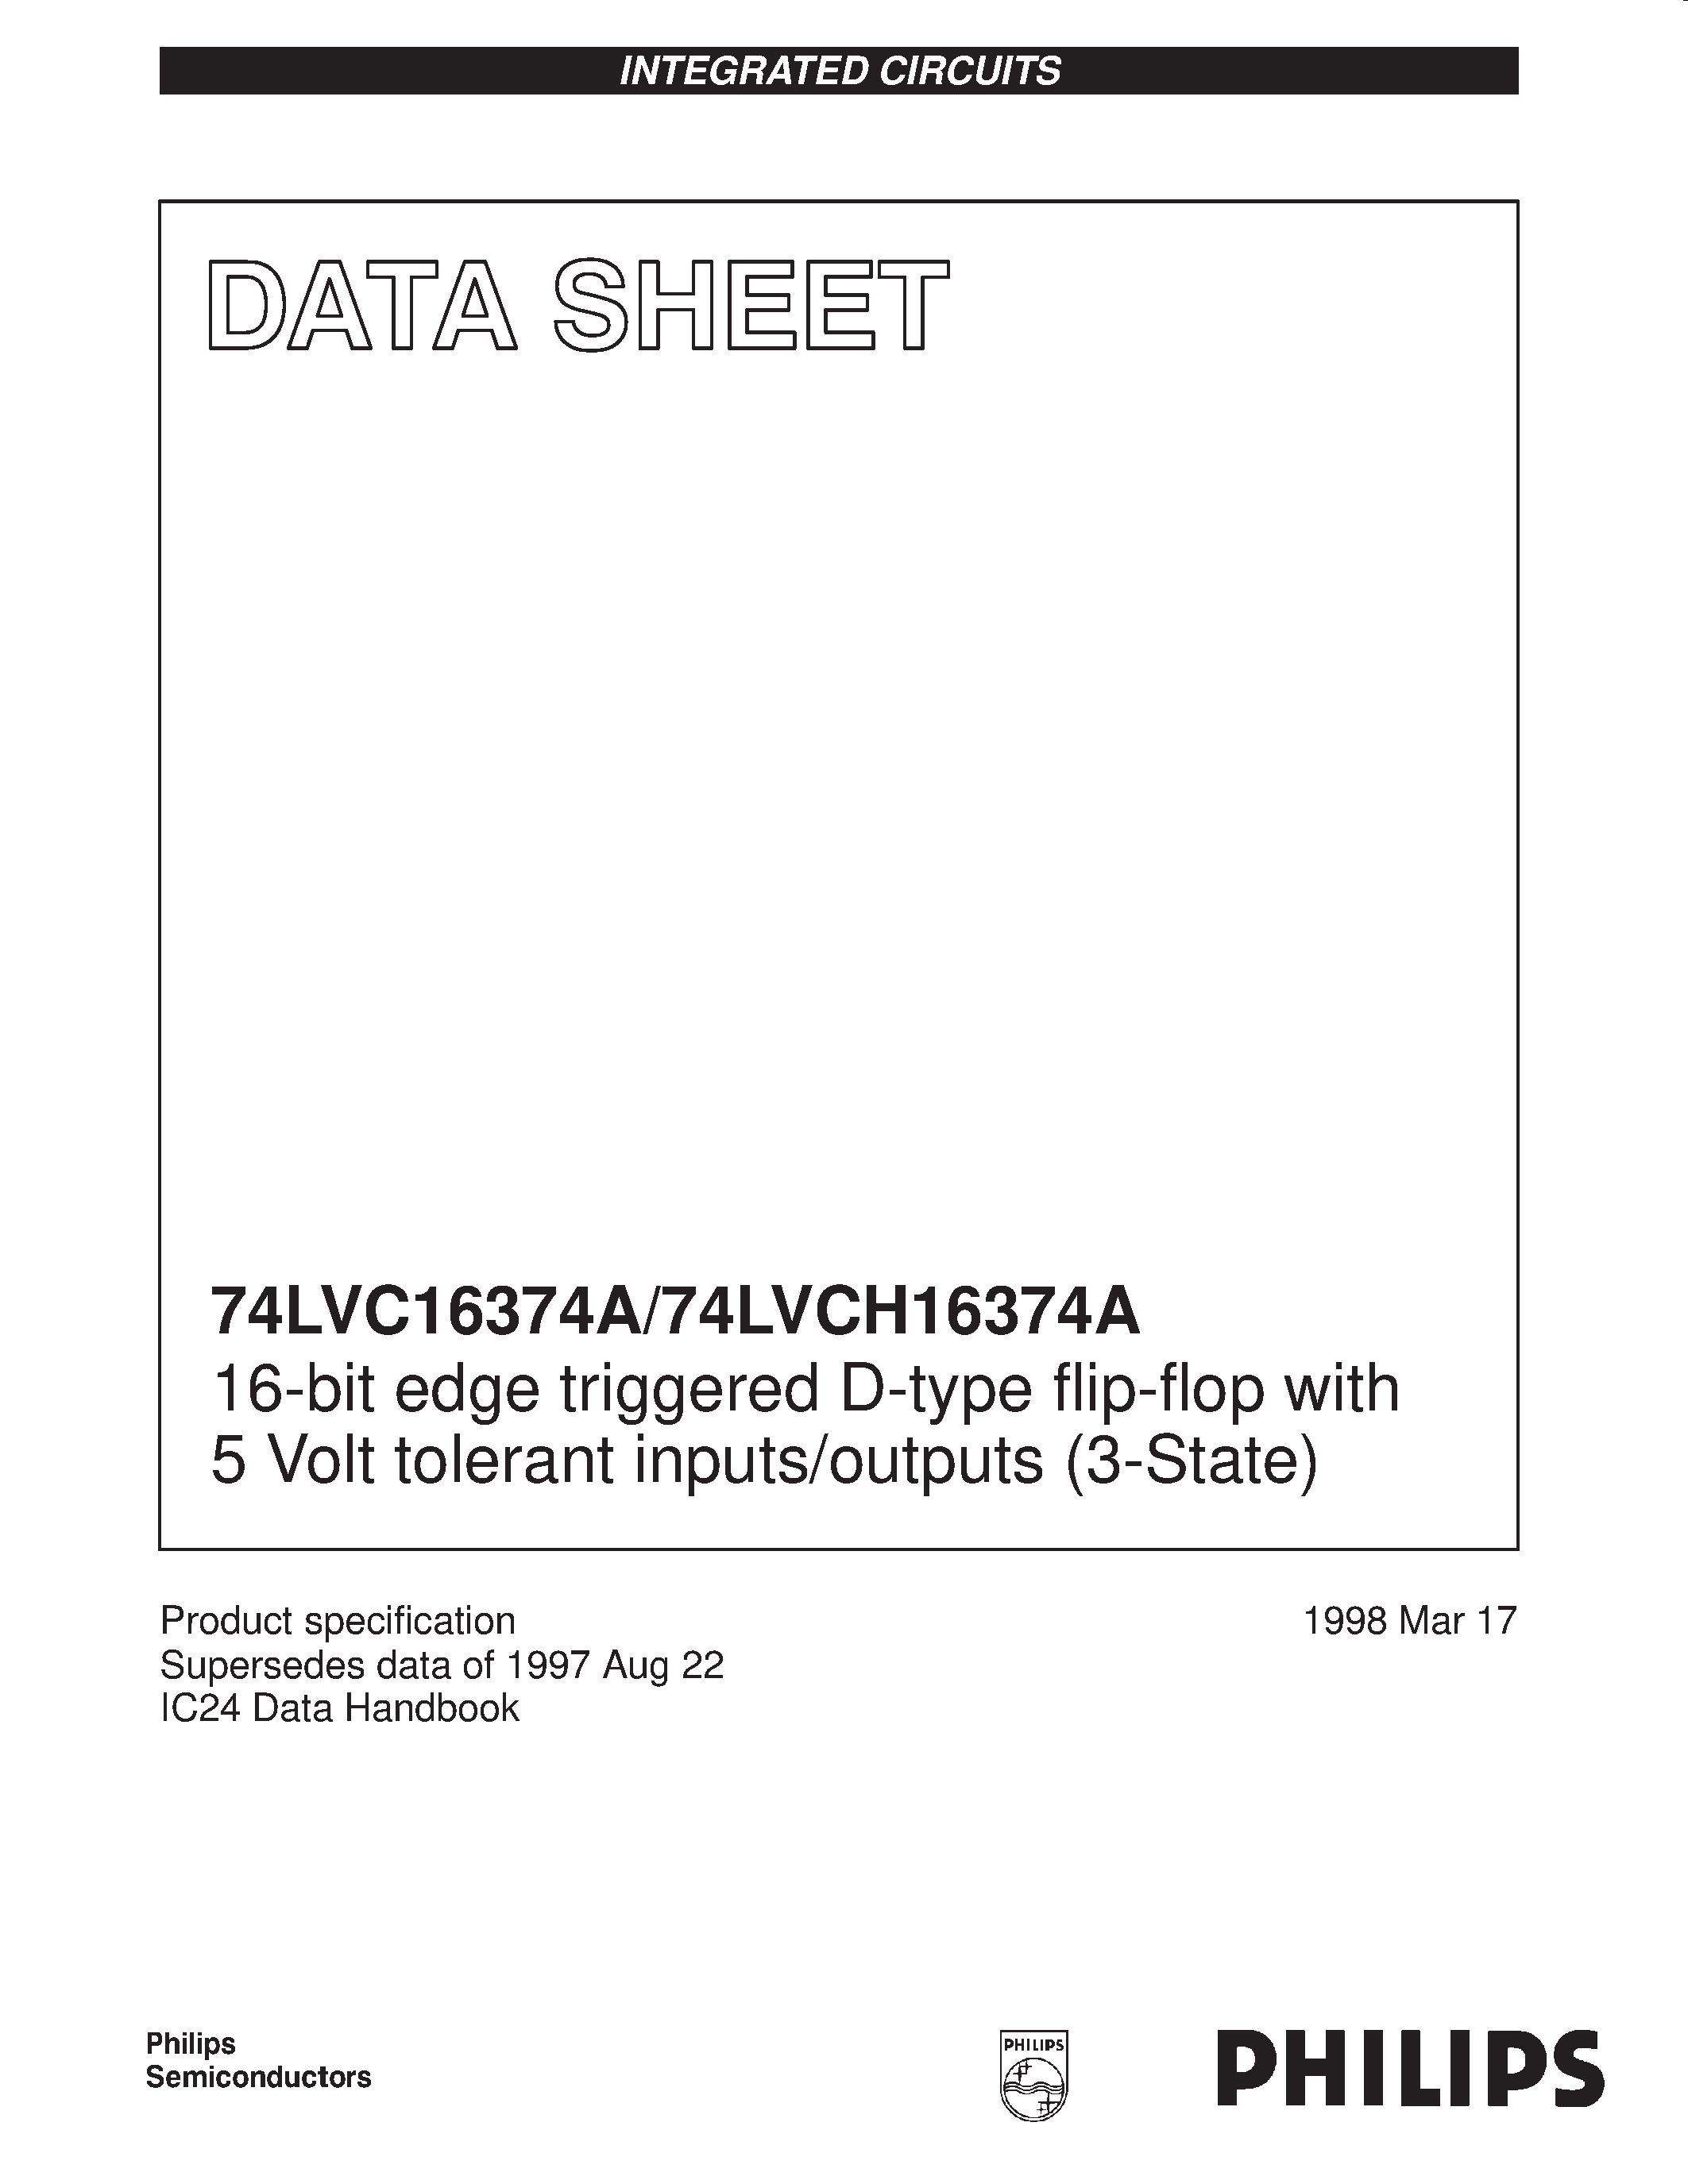 Datasheet VCH16374ADL - 16-bit edge triggered D-type flip-flop with 5 Volt tolerant inputs/outputs 3-State page 1